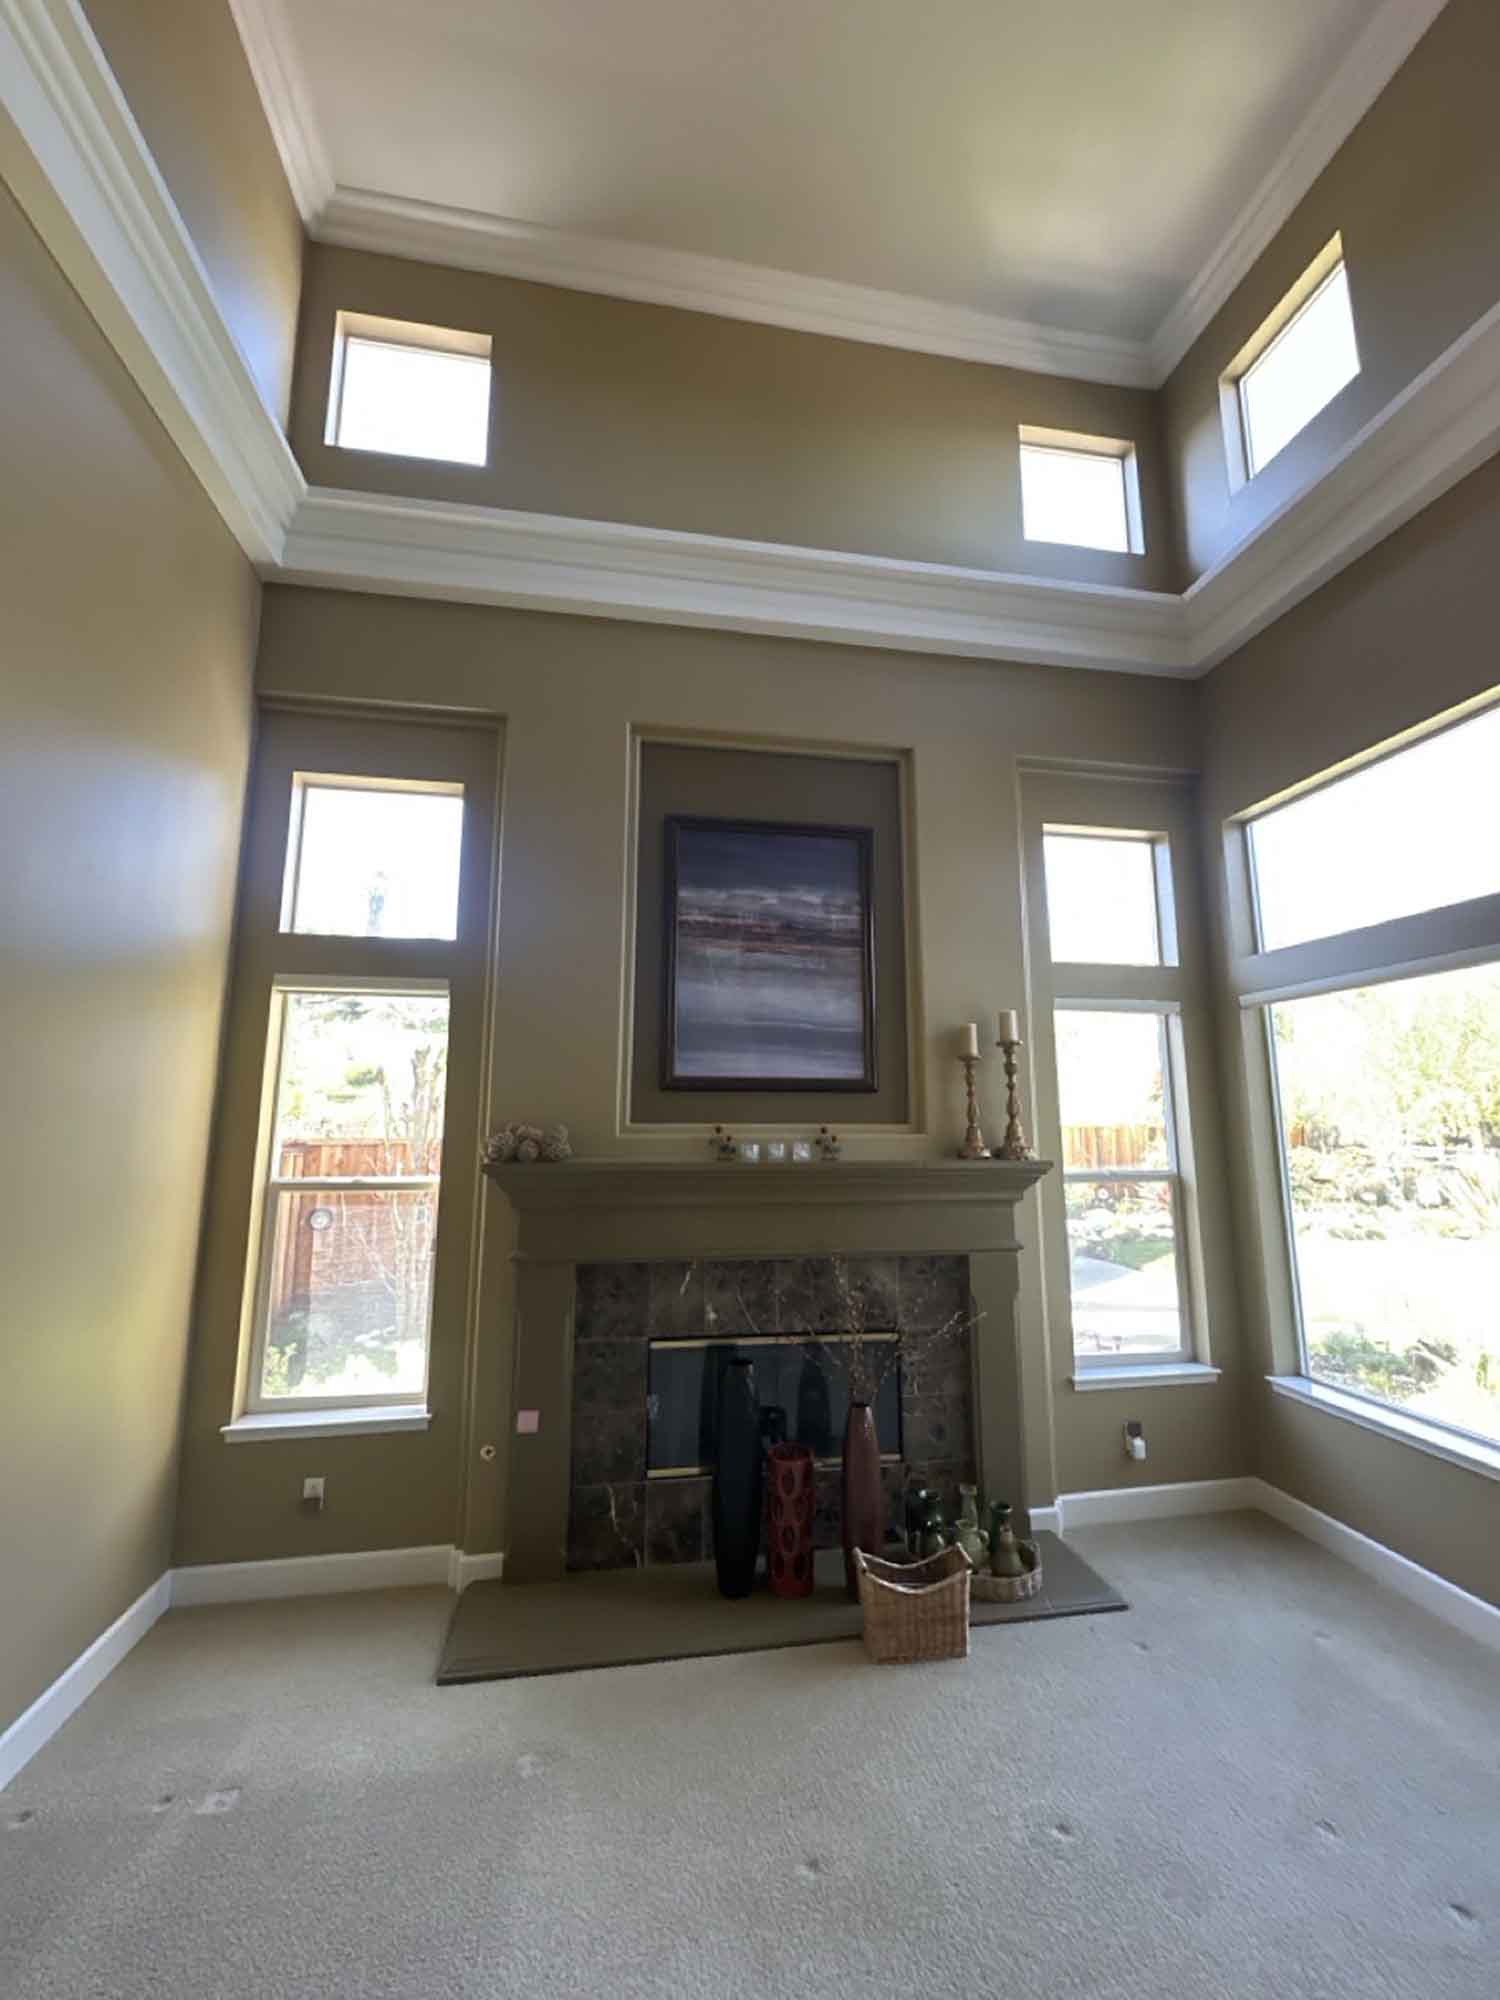 Sun Control Window Tinting for San Jose, CA Homes by ClimatePro